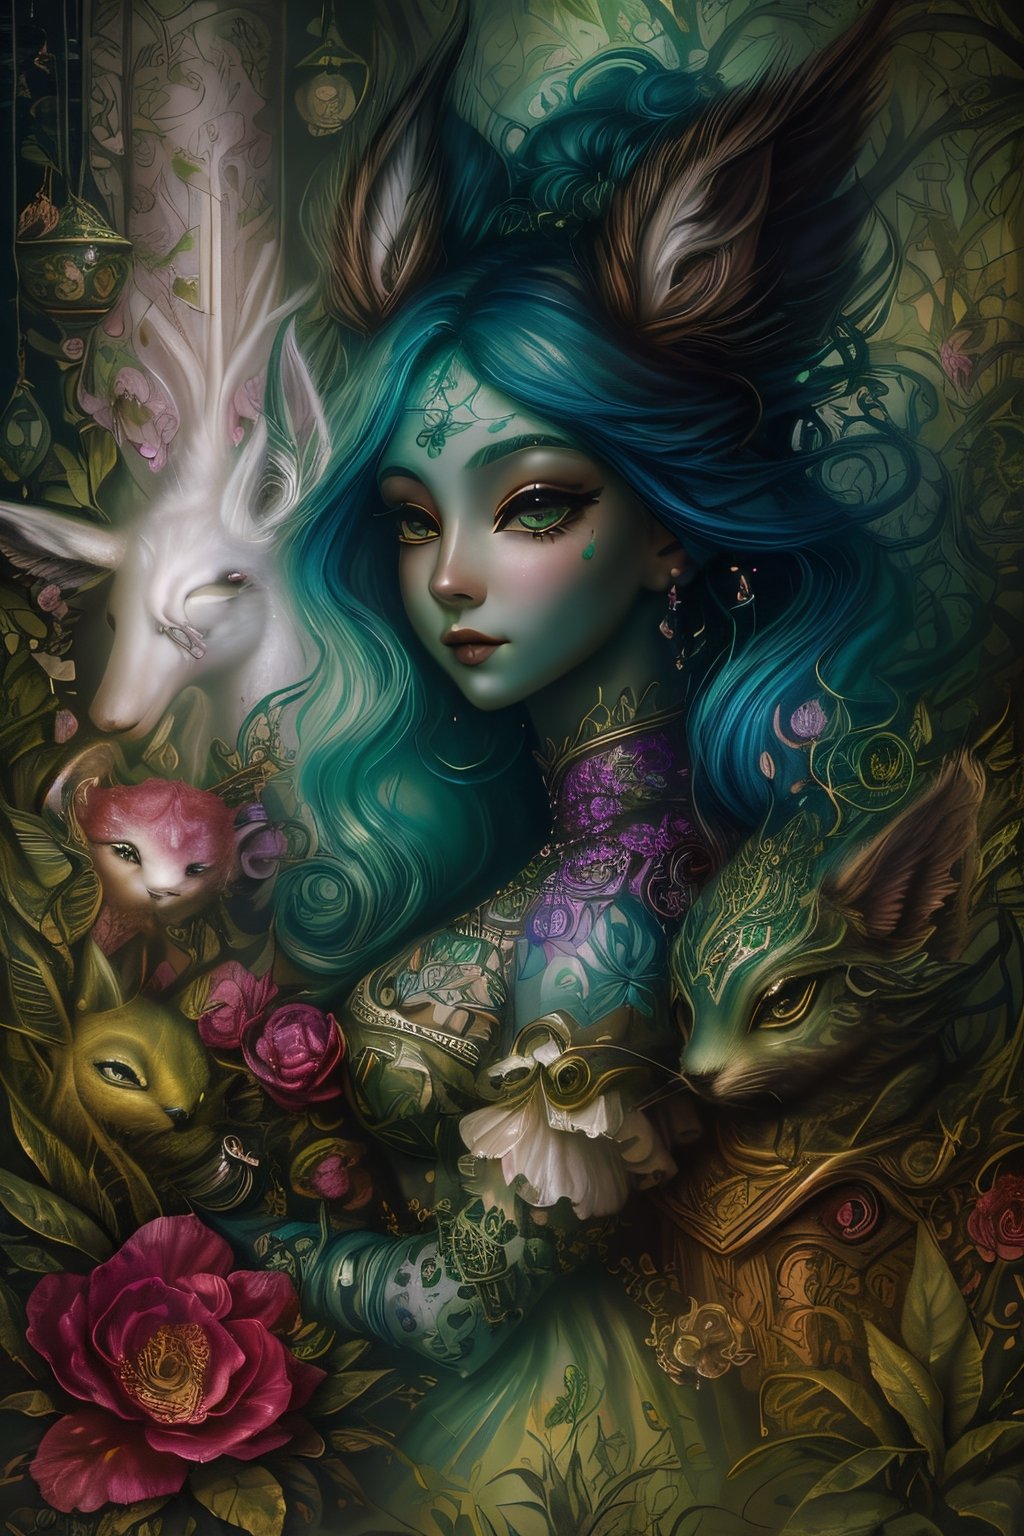 (High definition) (Woman) (Vivid colors, delicate florals, surrealistic elements, whimsical creatures, close-up view, lush surroundings, dreamlike atmosphere) (Artistic, imaginative, quirky, captivating)